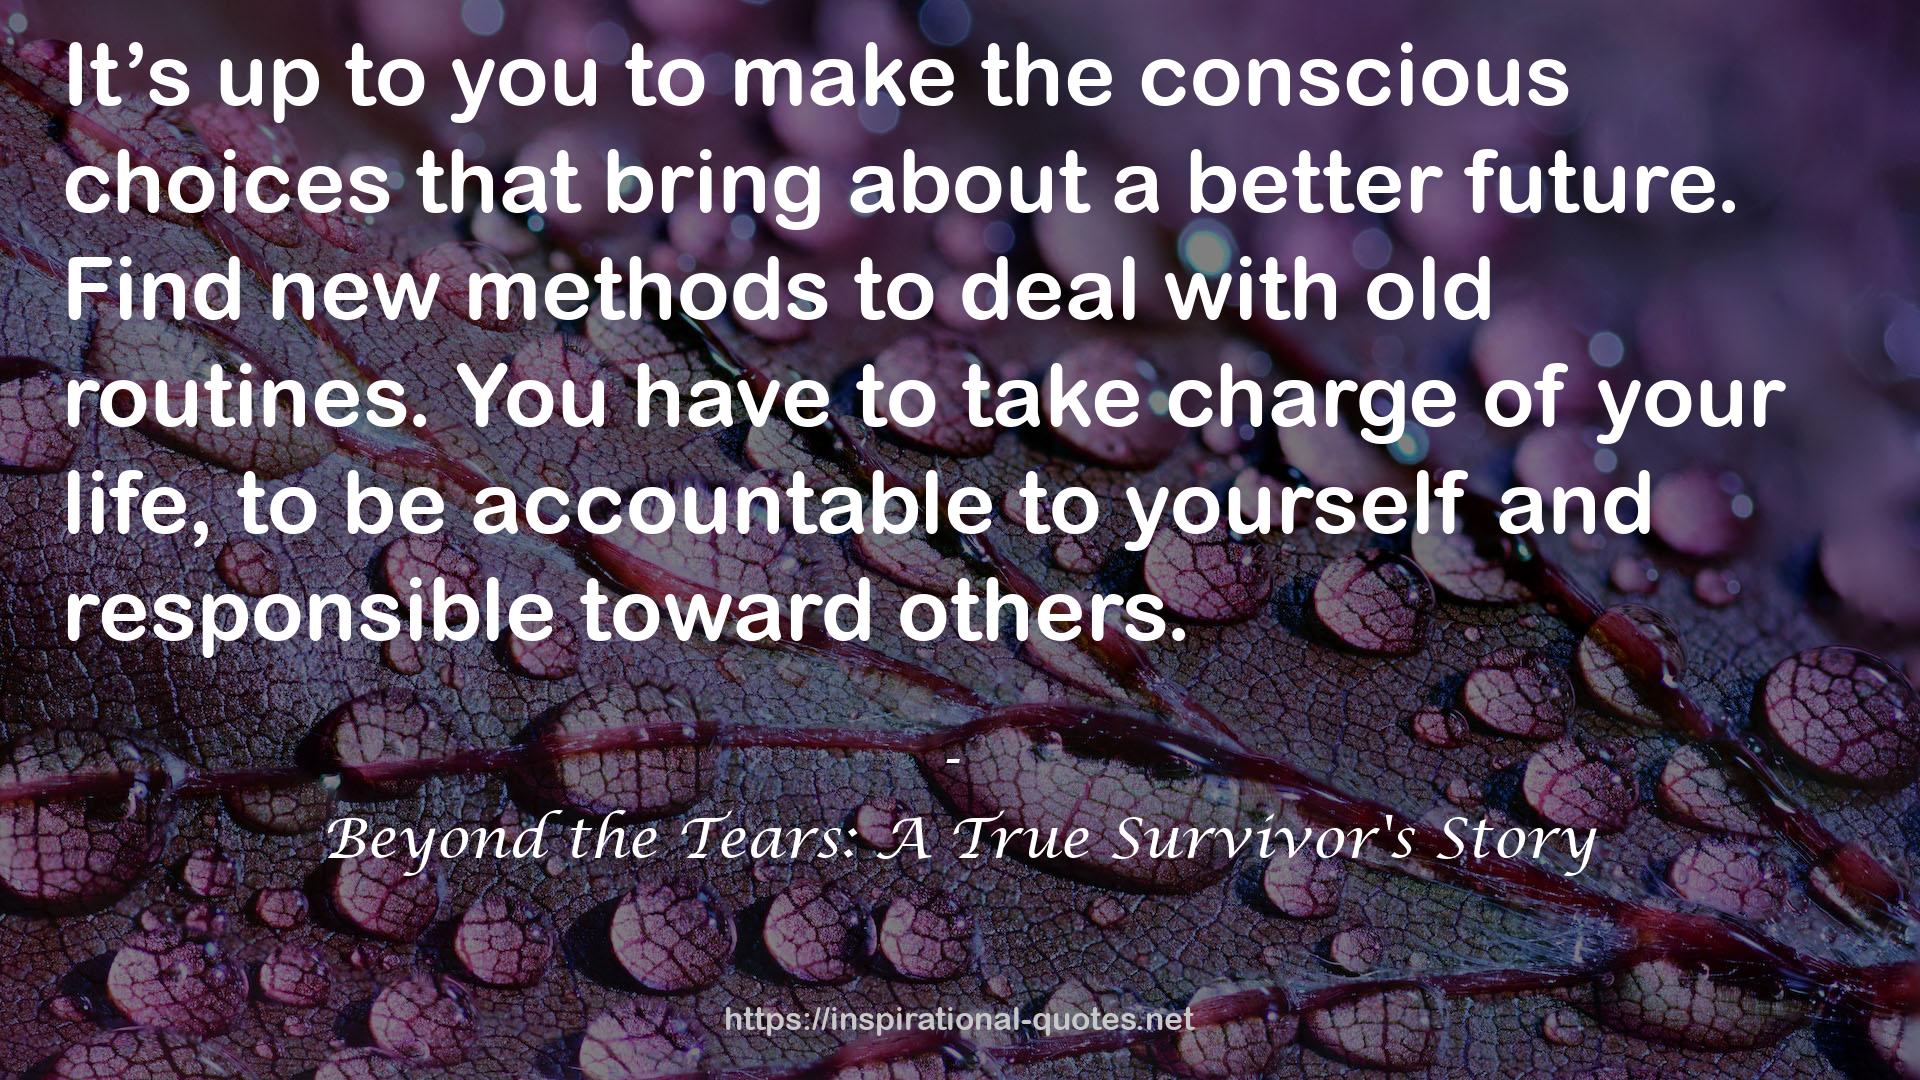 Beyond the Tears: A True Survivor's Story QUOTES